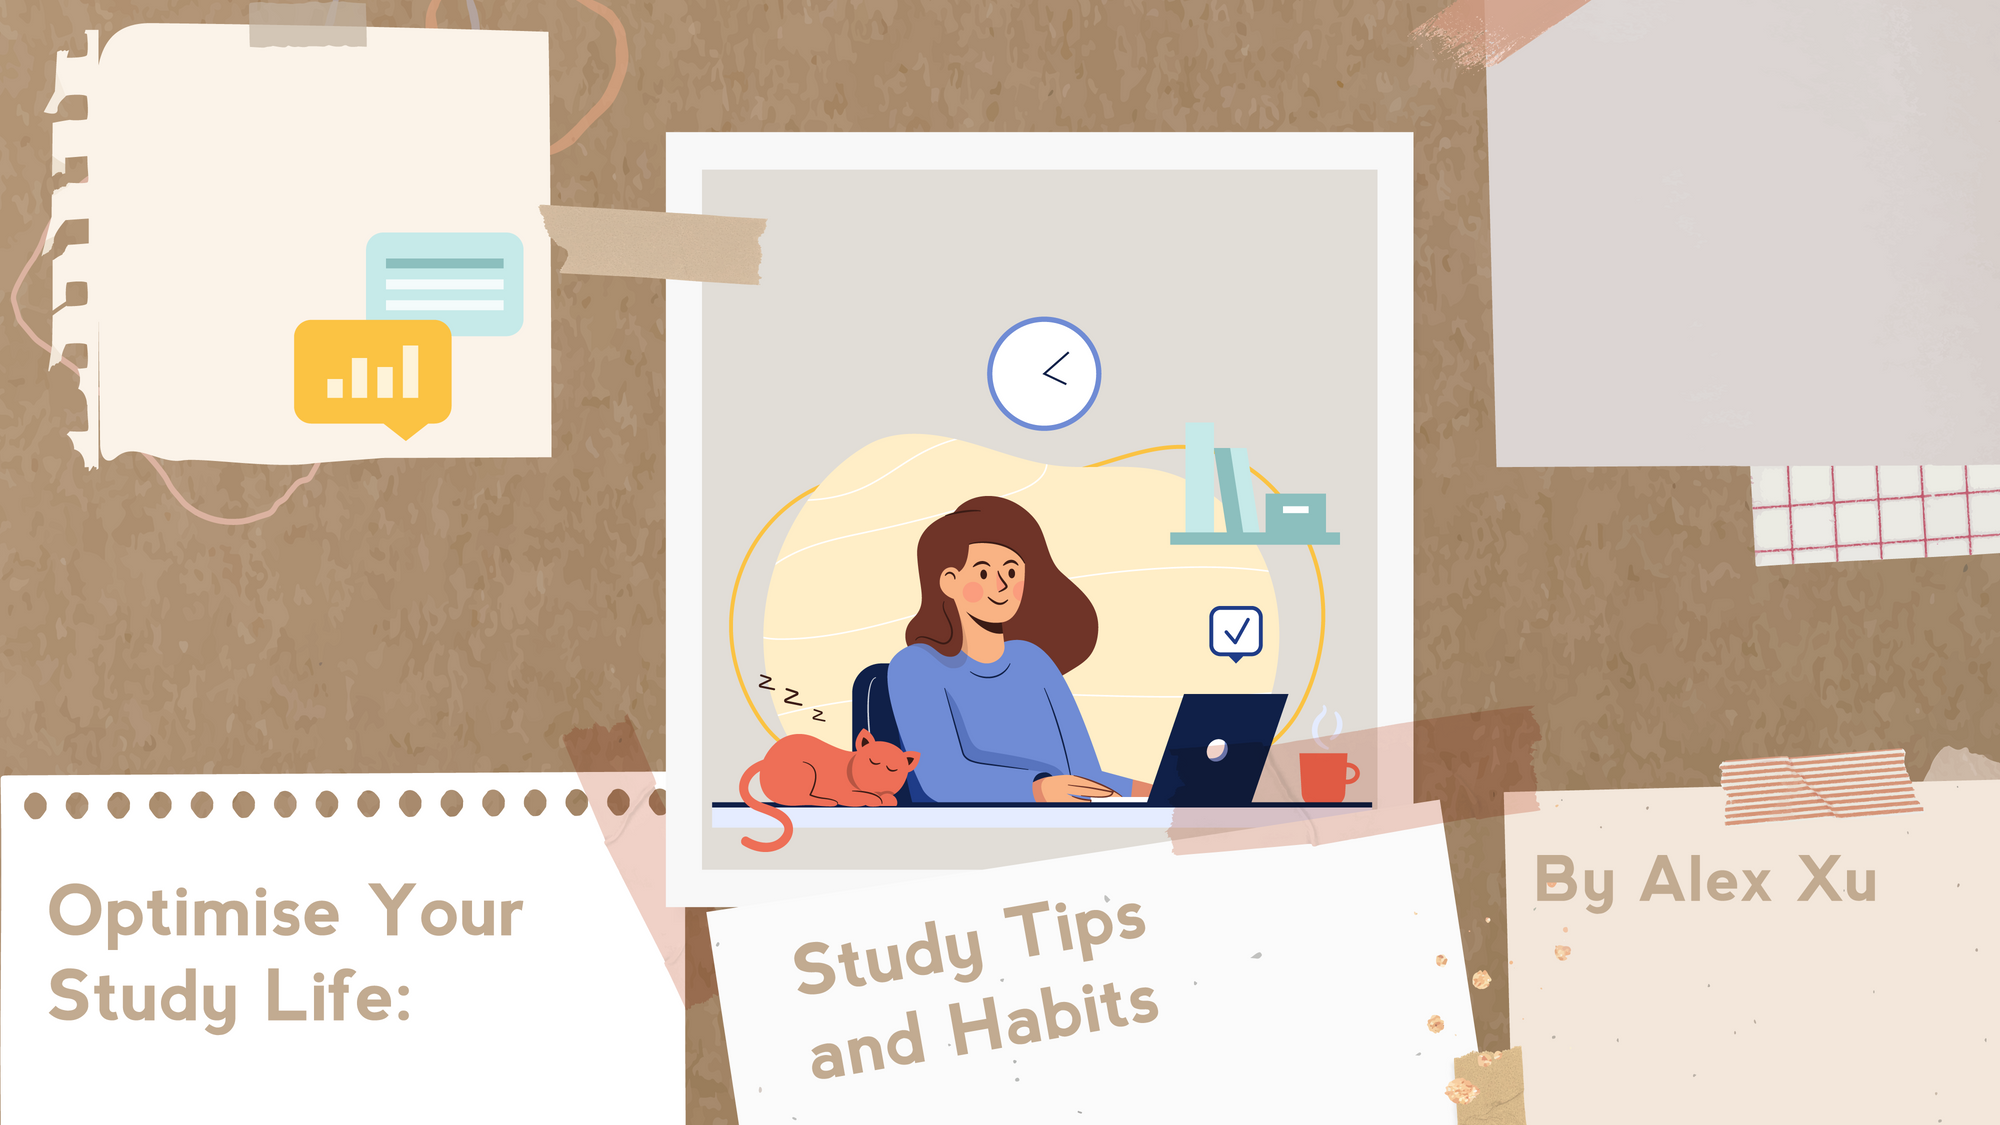 Optimise Your Study Life: Study Tips and Habits